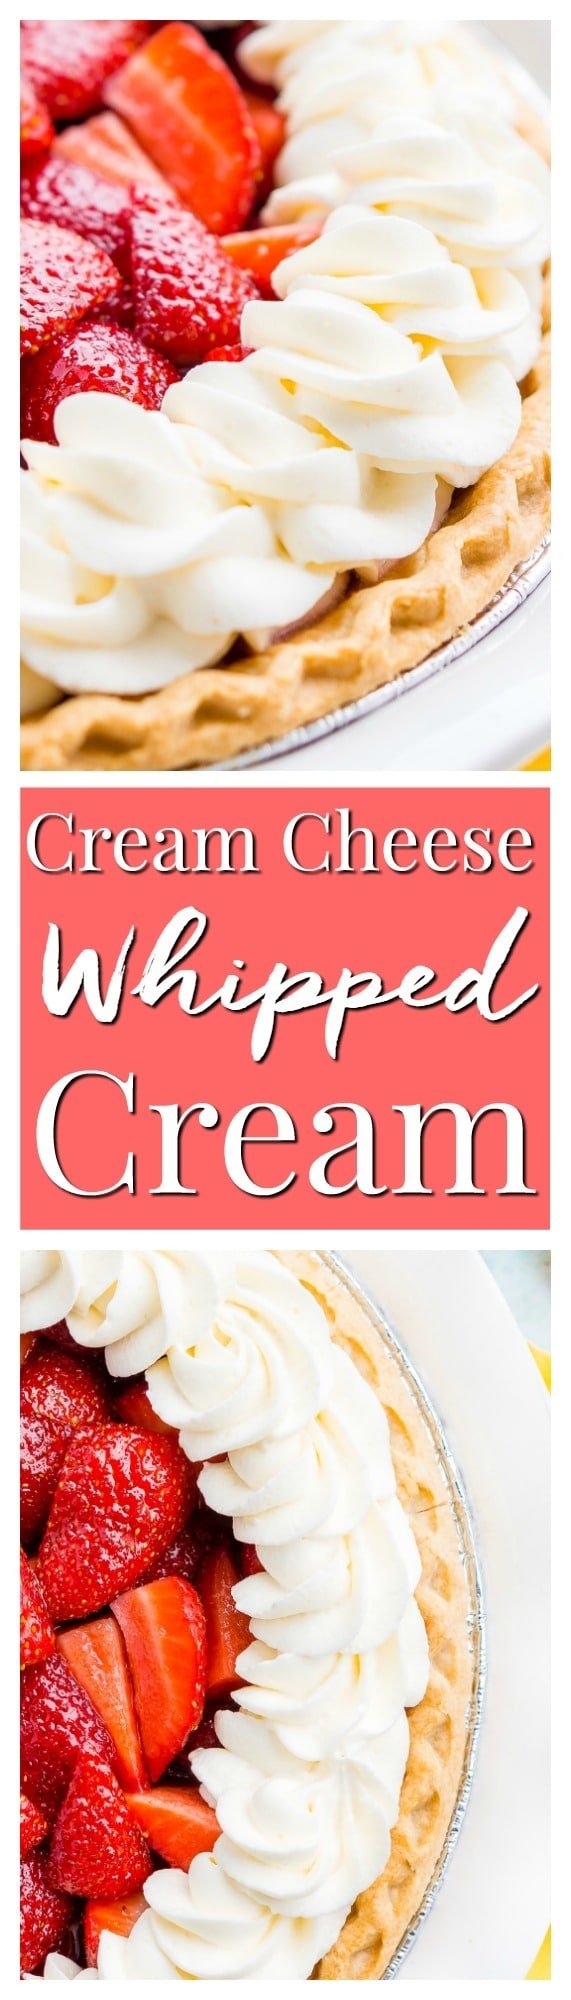 This Cream Cheese Whipped Cream is deliciously creamy and tangy topping for desserts, milkshakes, hot chocolate, and more! Made with just 4 ingredients and ready in 5 minutes! via @sugarandsoulco